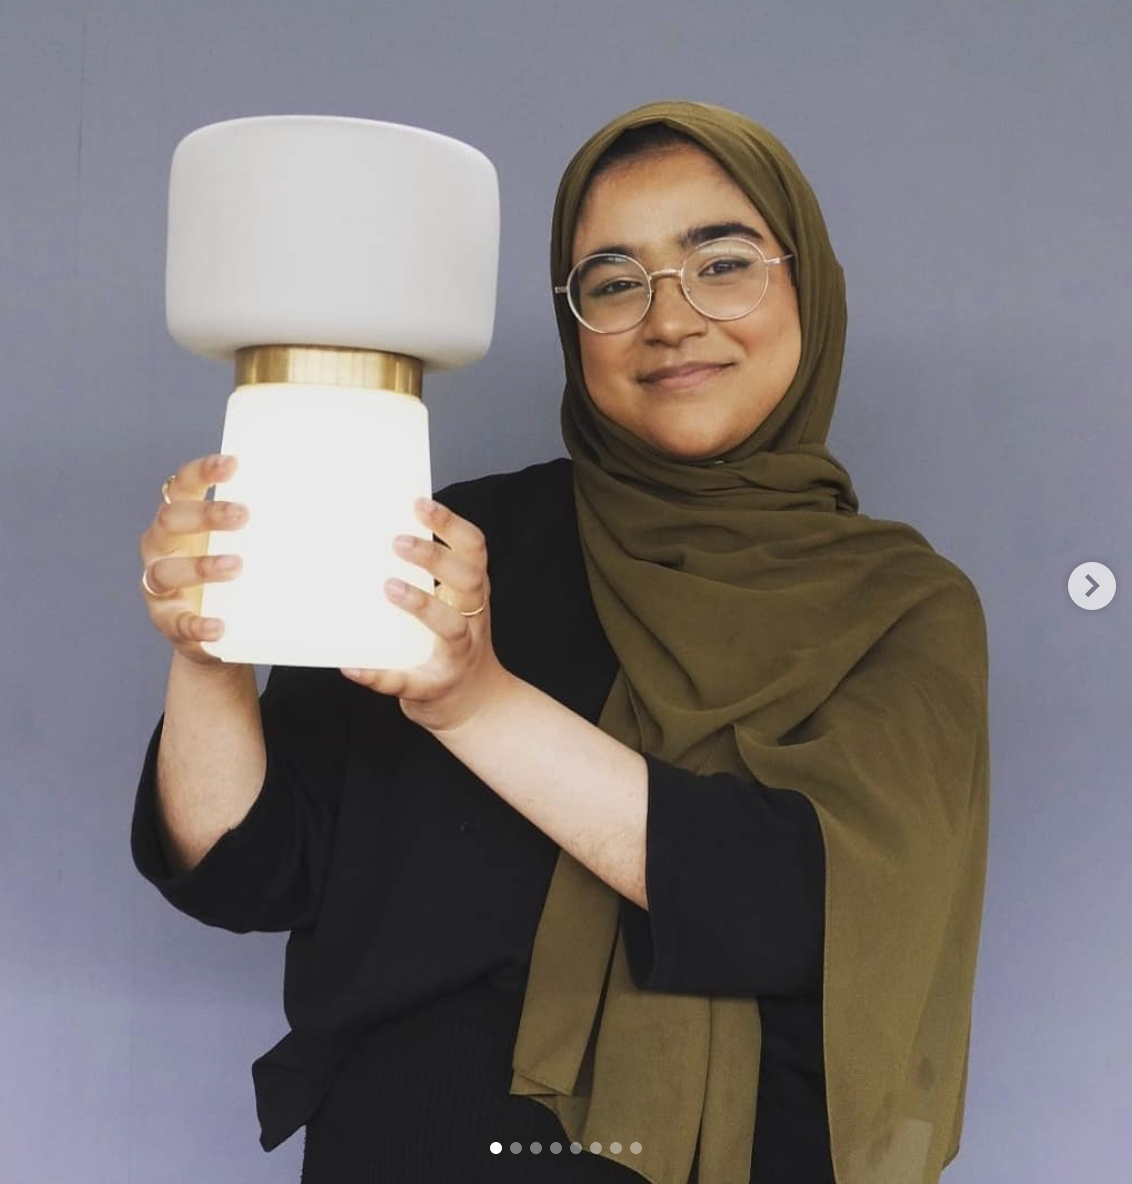 Ceramicist Soyida Akhtar proudly holds up one of her modular Wedgwood lamps.